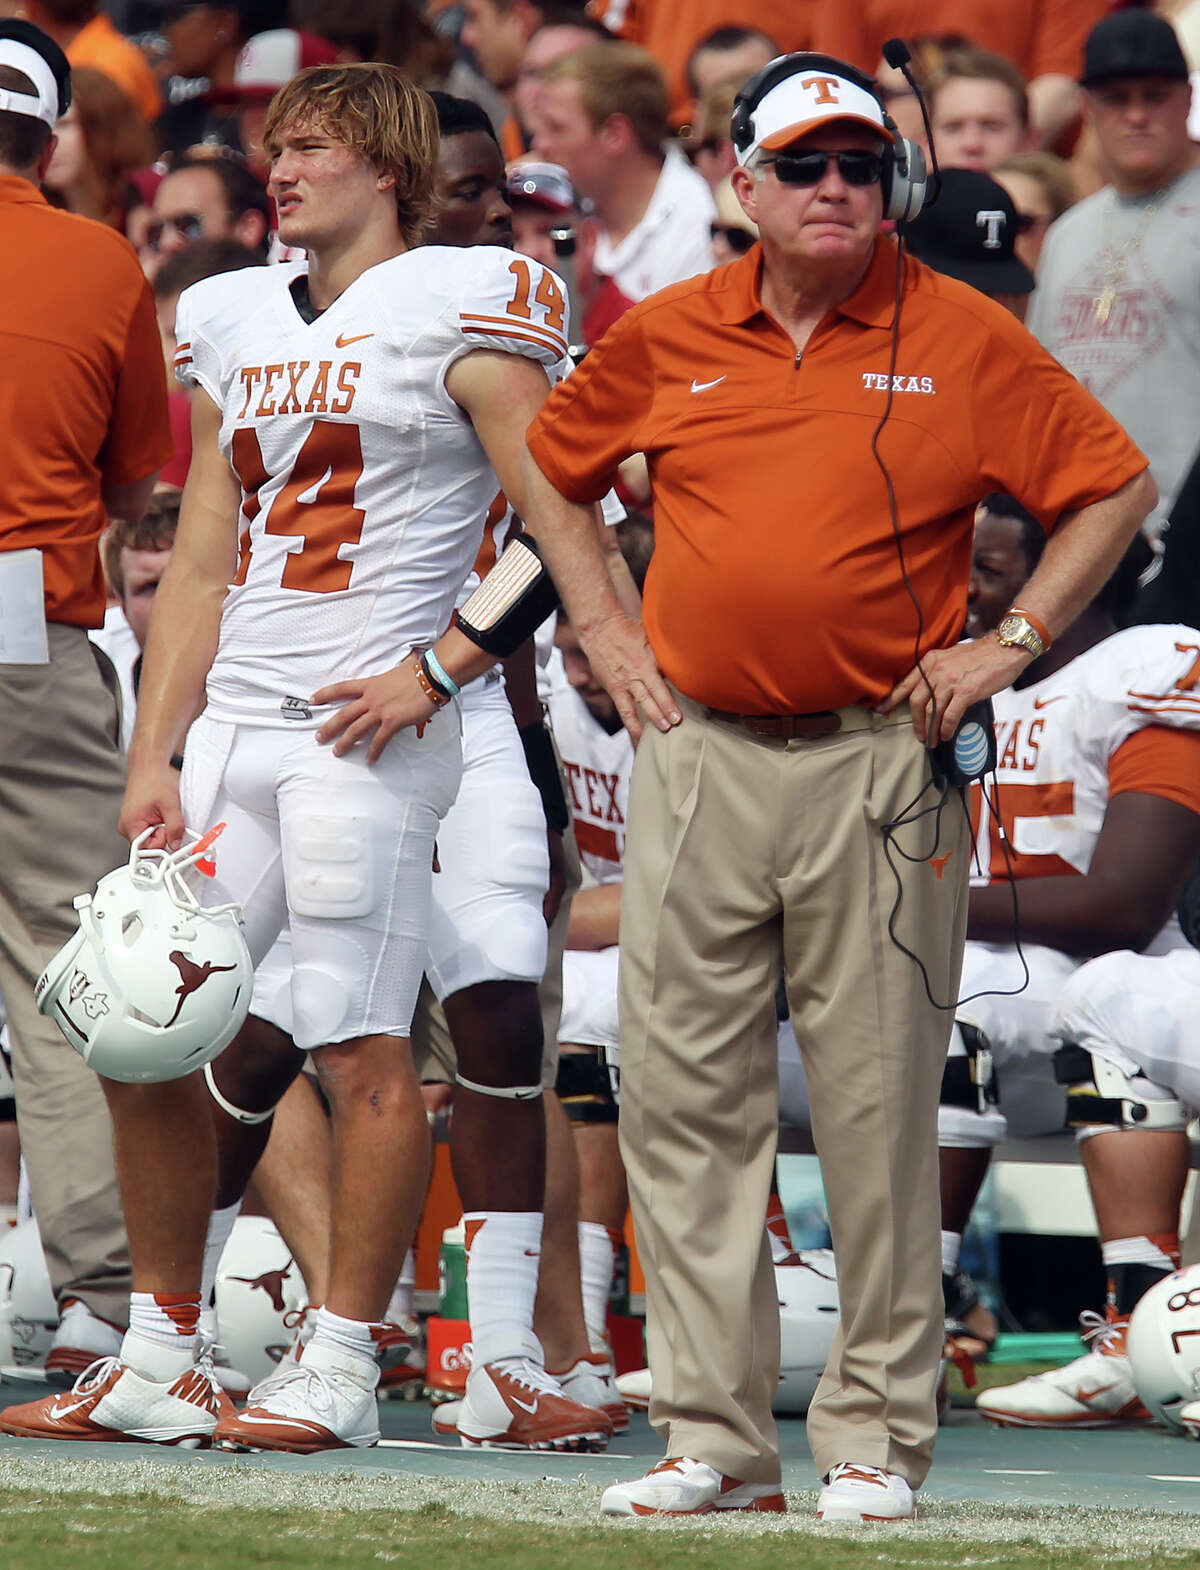 Texas Longhorns head coach Mac Brown (right) and quarterback David Ash (left) had difficulty finding a solution against the Oklahoma Sooners in the second half at the Red River Rivalry at the Cotton Bowl in Dallas on Saturday, Oct. 13, 2012. The Sooners defeated the Longhorns 63-21.